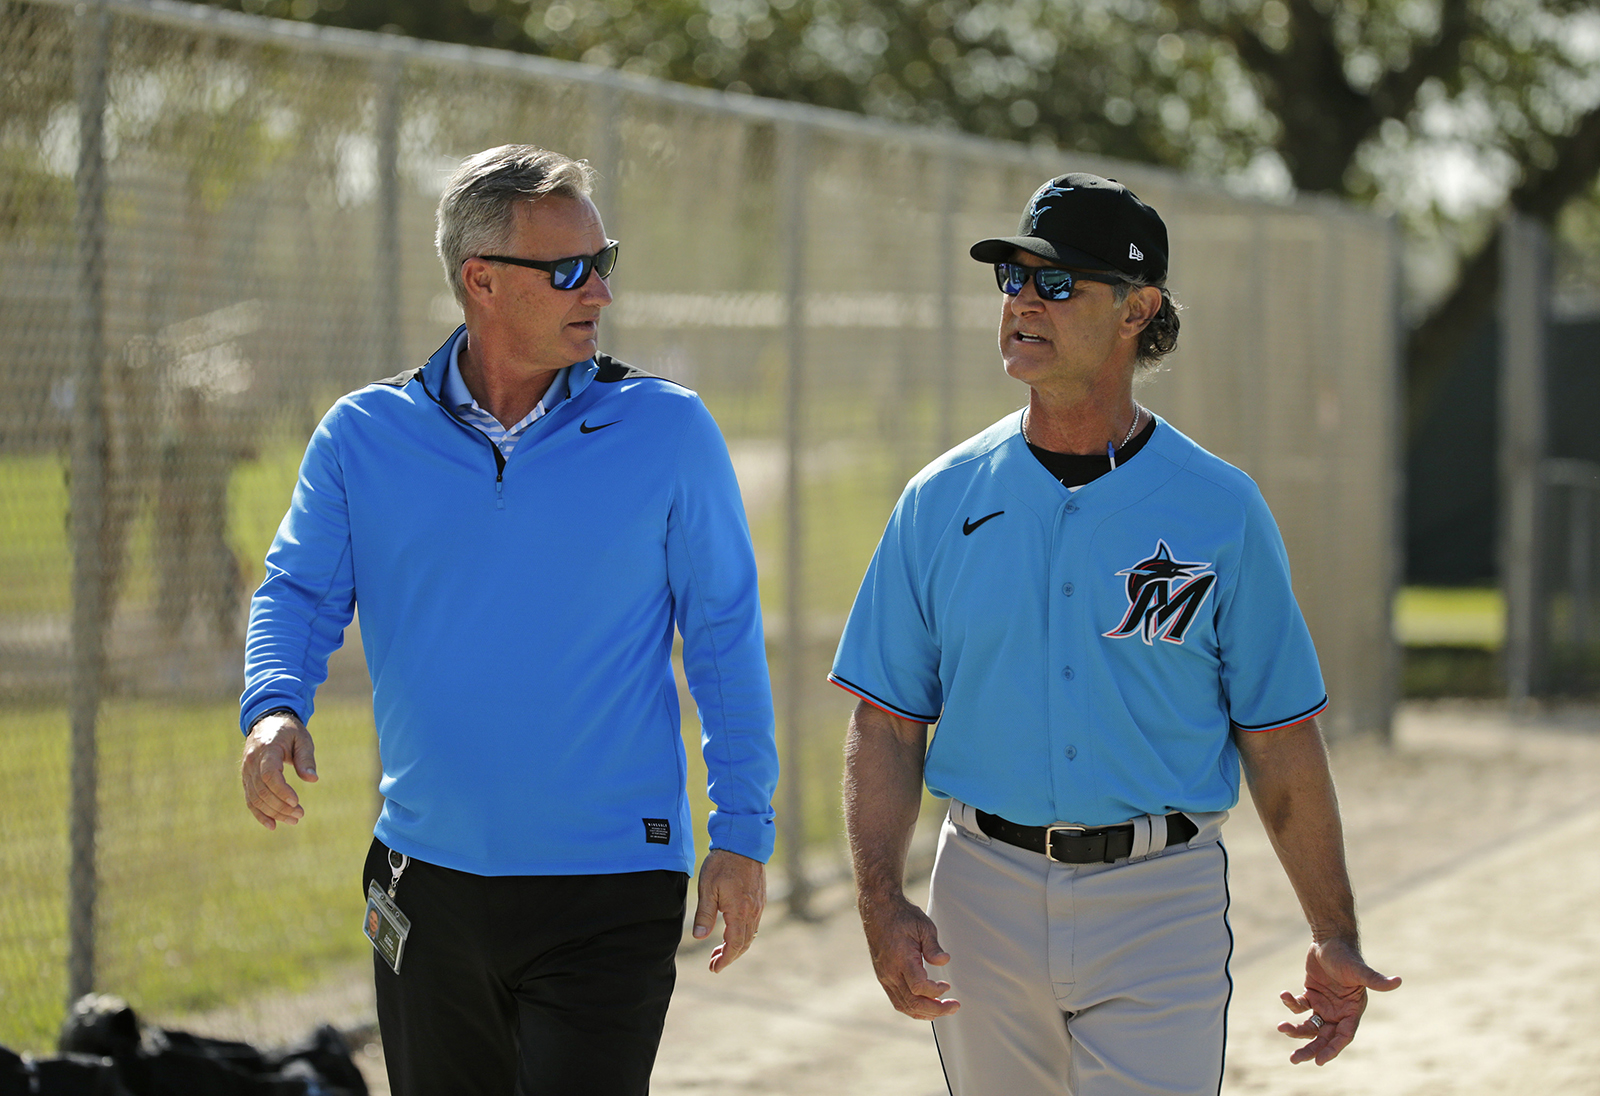 Mattingly has seen the Marlins’ rebuild unfold. His goal now: ‘Get to the finish line.’